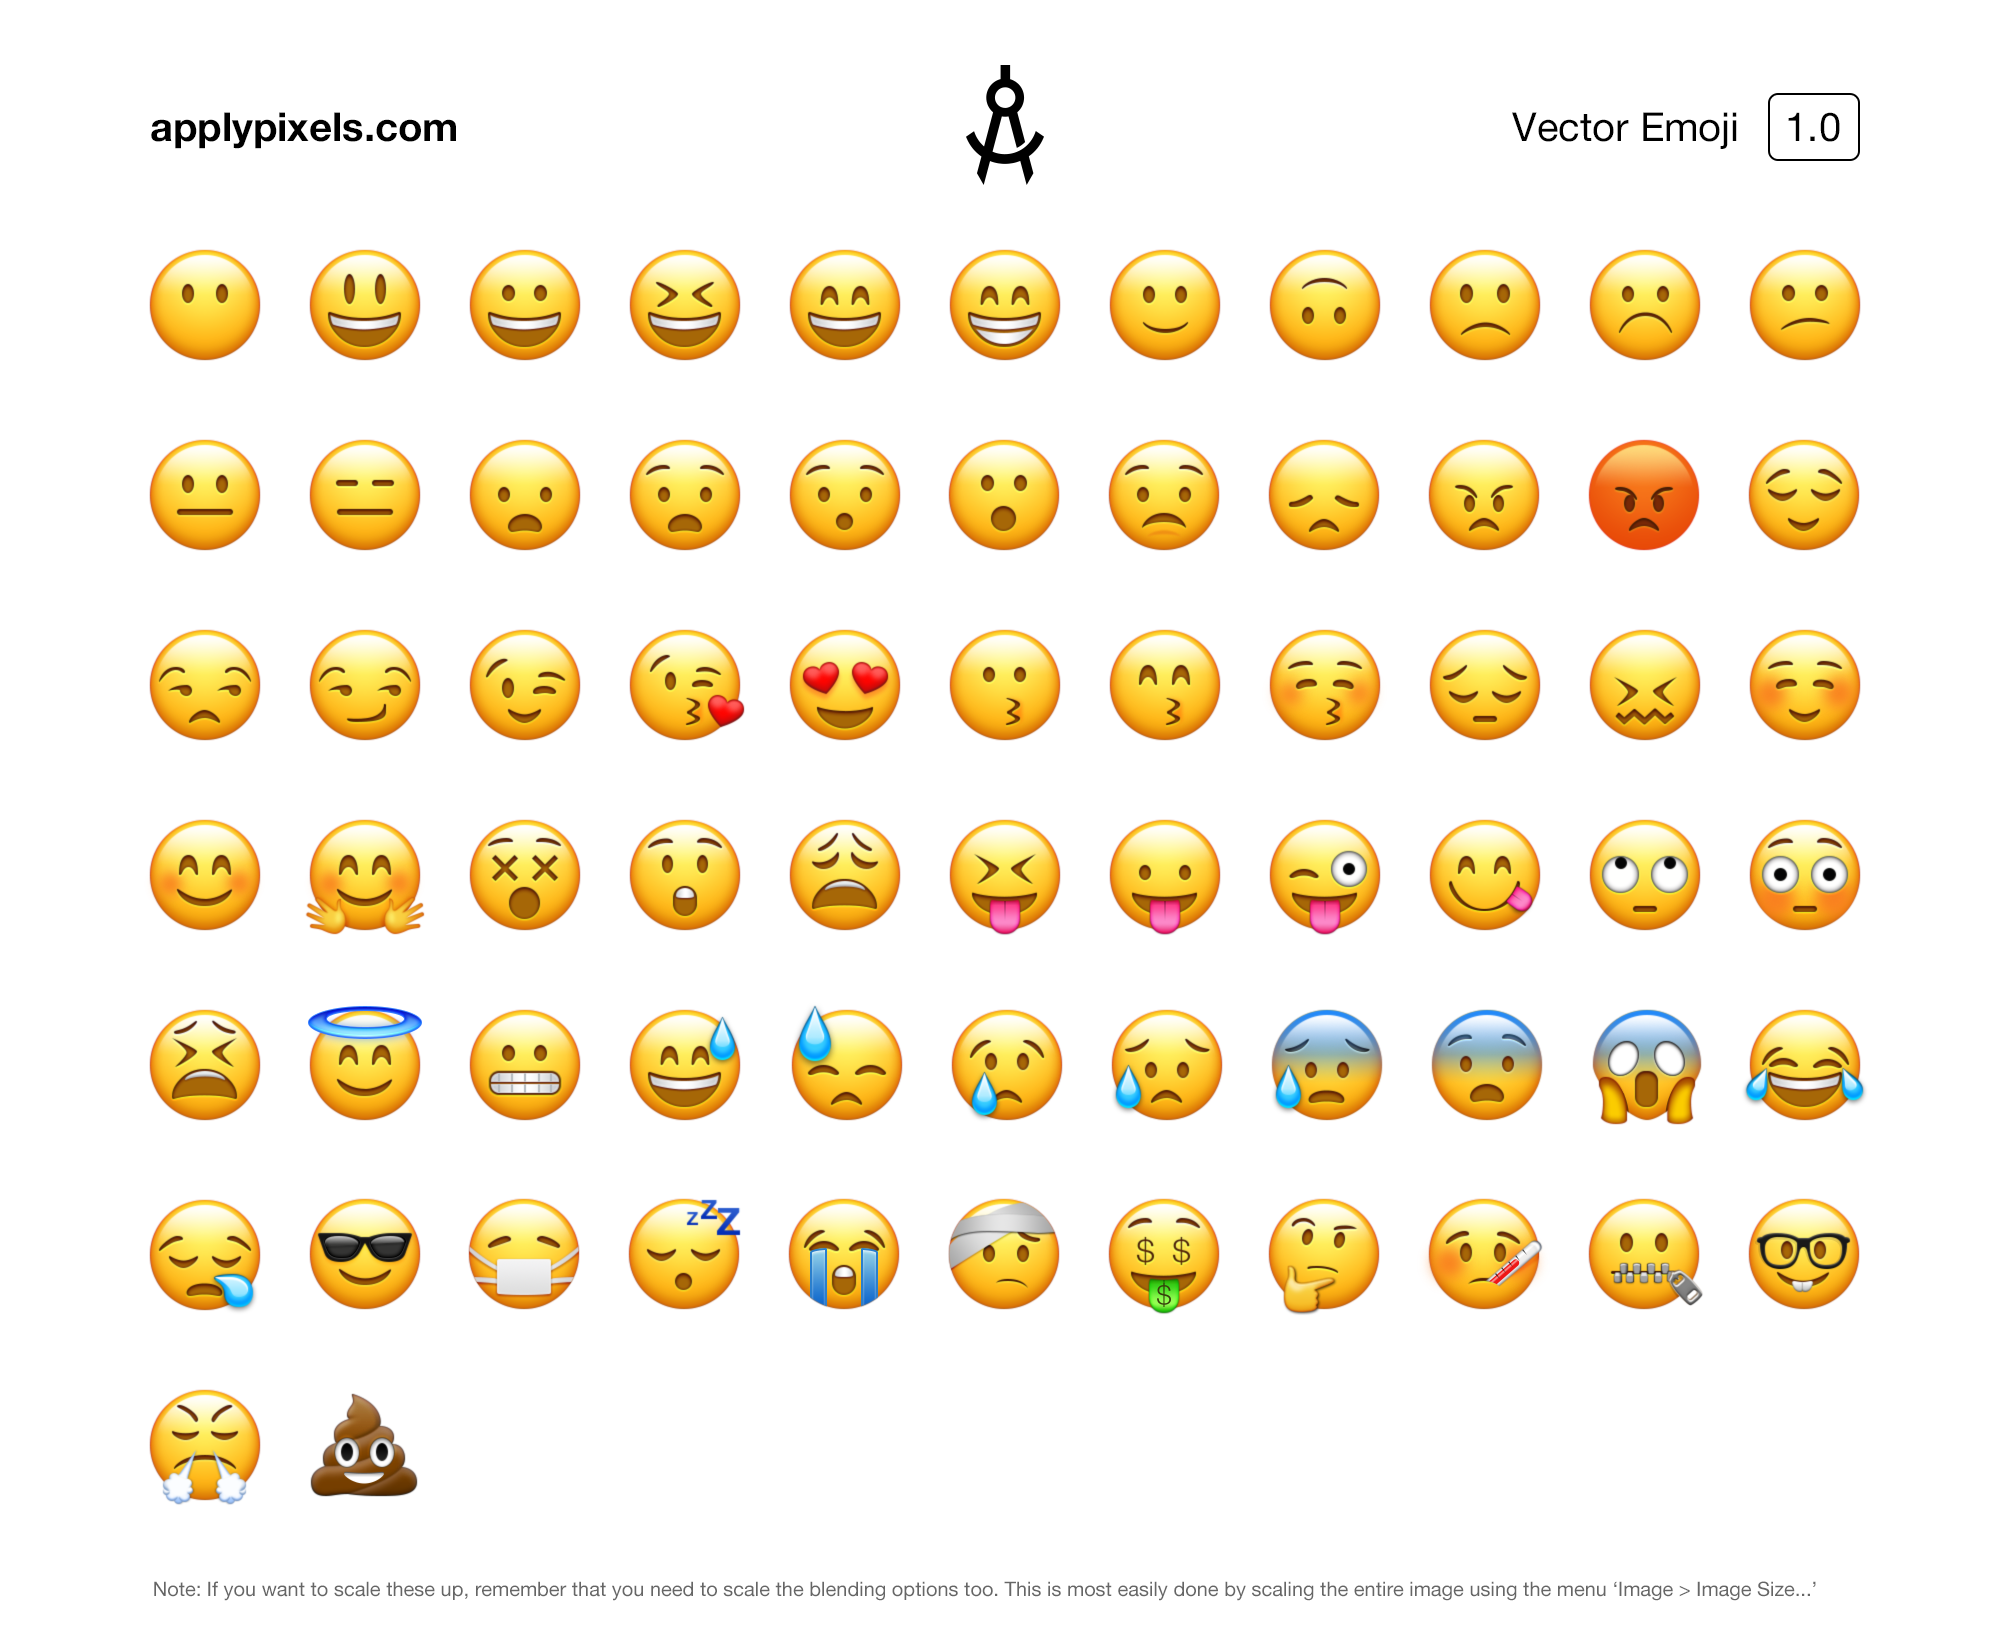 Download Dribbble - vector-emoji-_1.0_.png by Michael Flarup